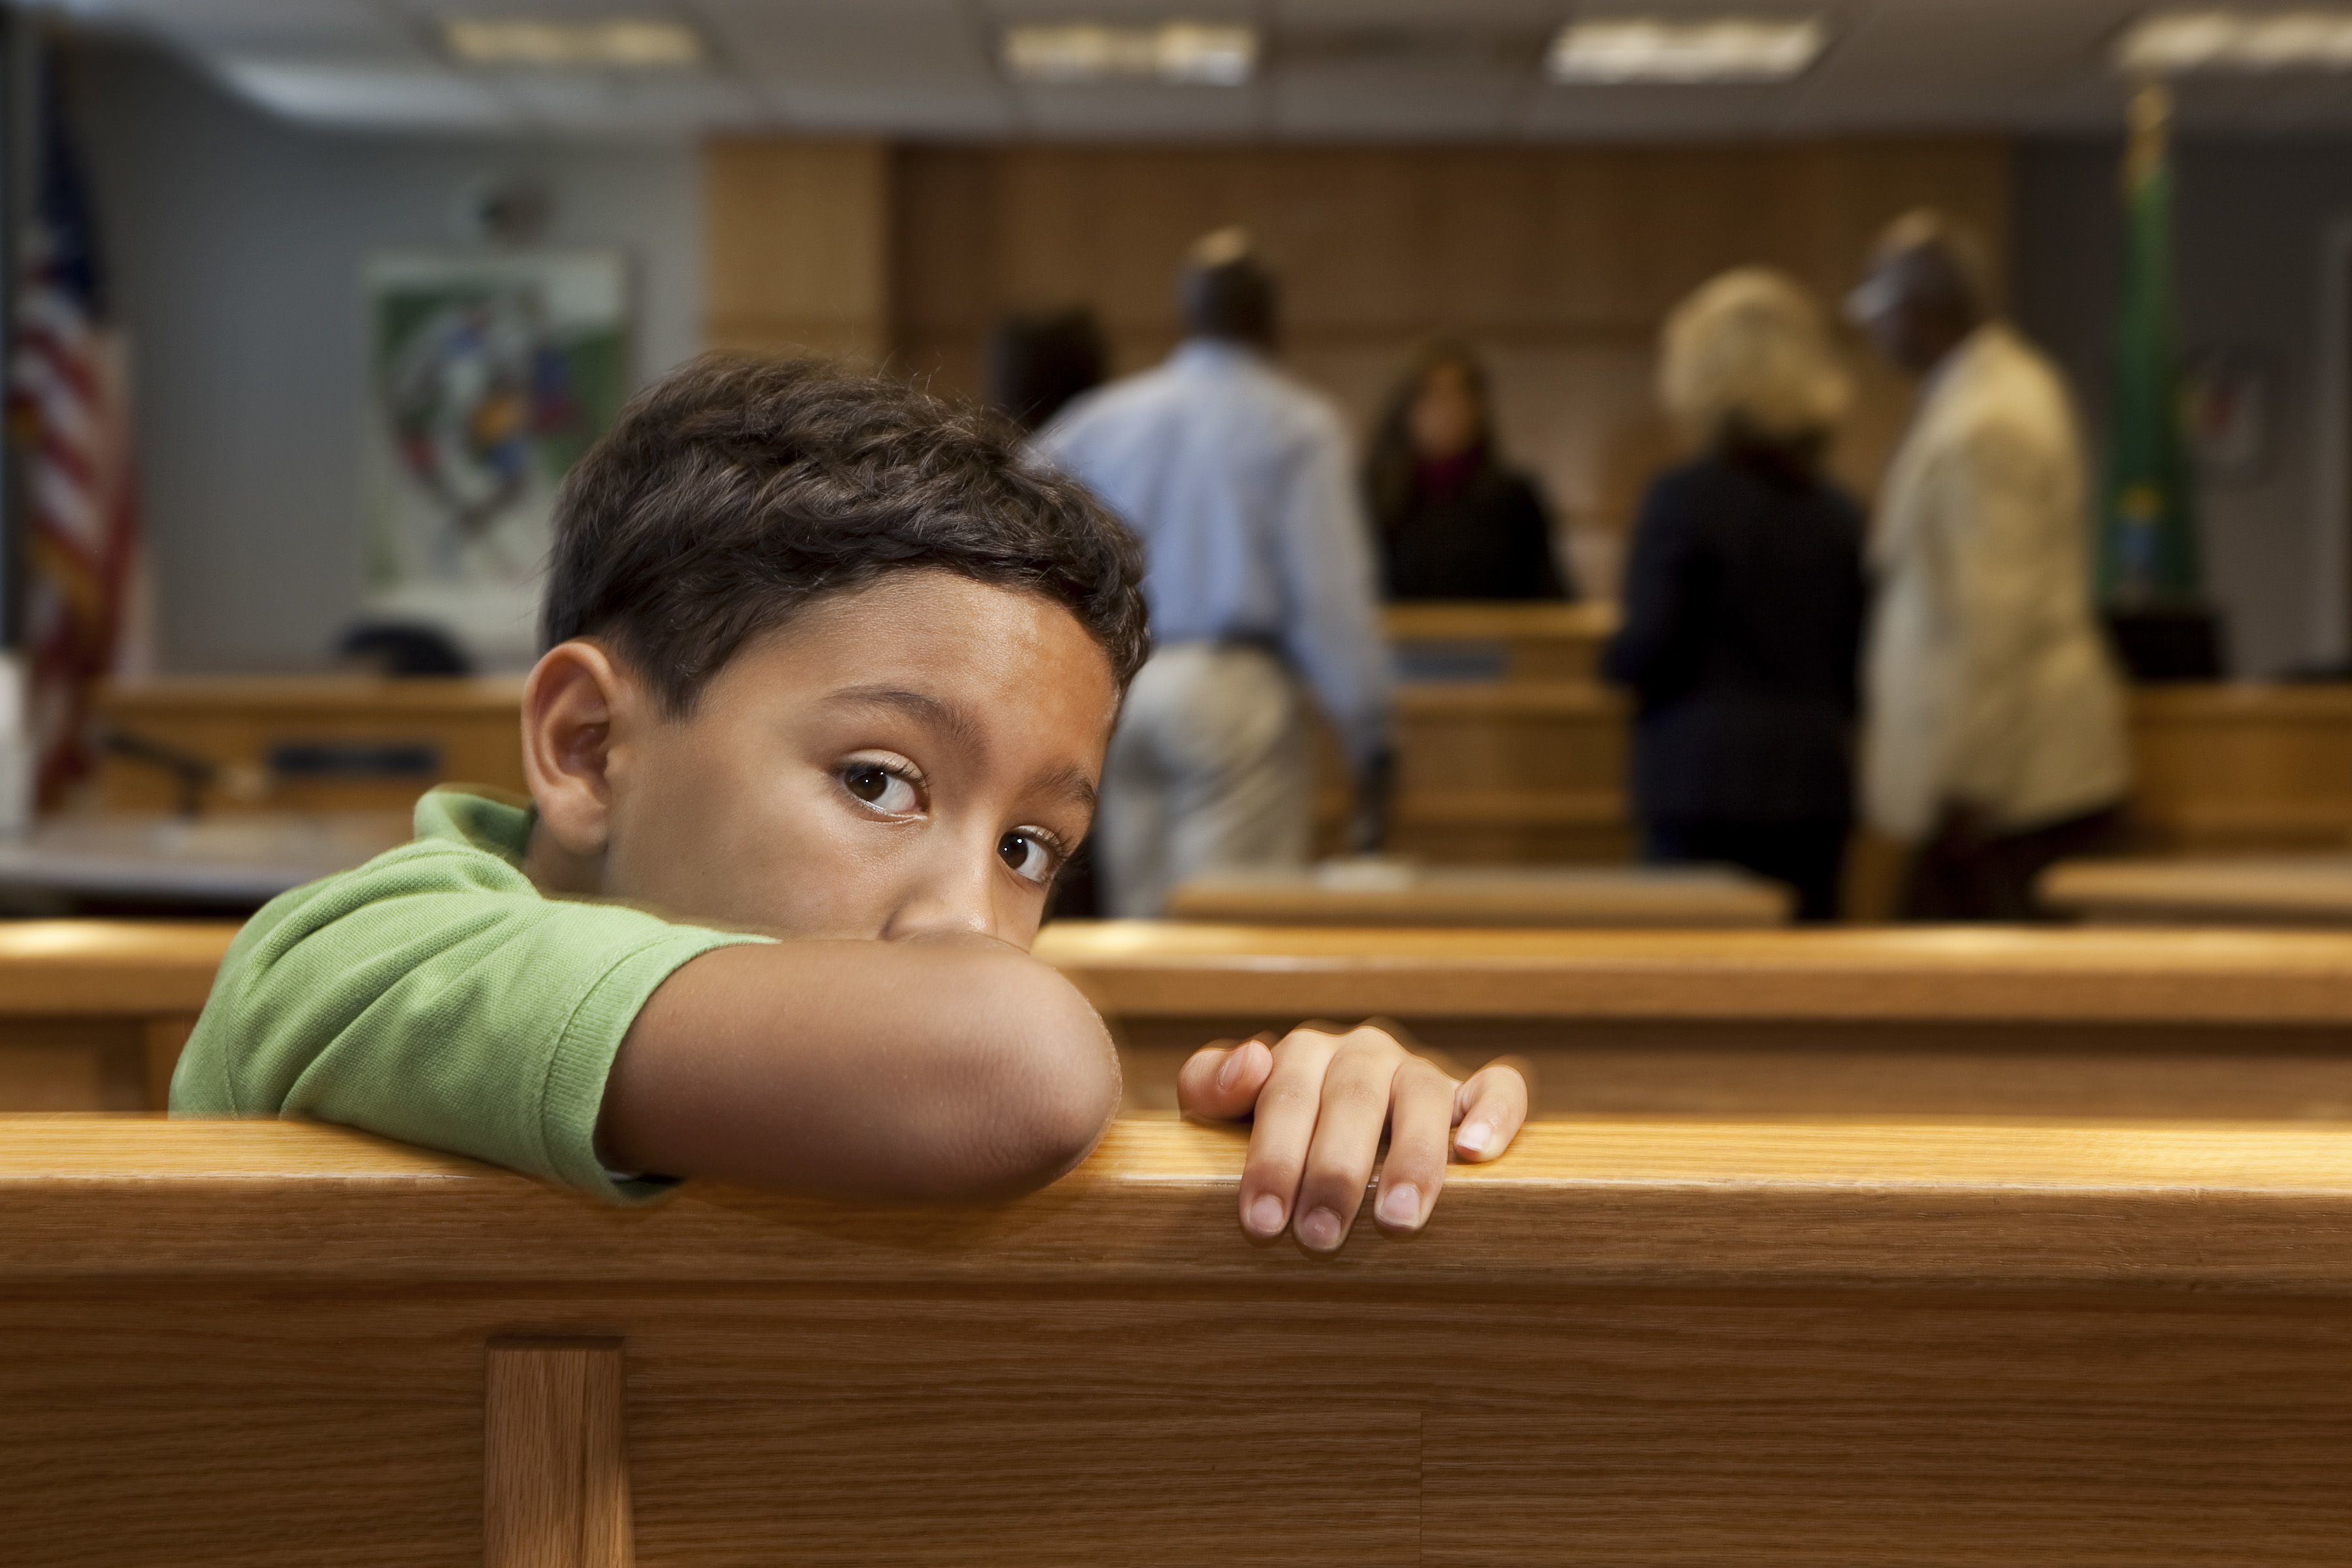 A boy sits on a bench in courtroom alone, his face looking over the back of bench at the camera.